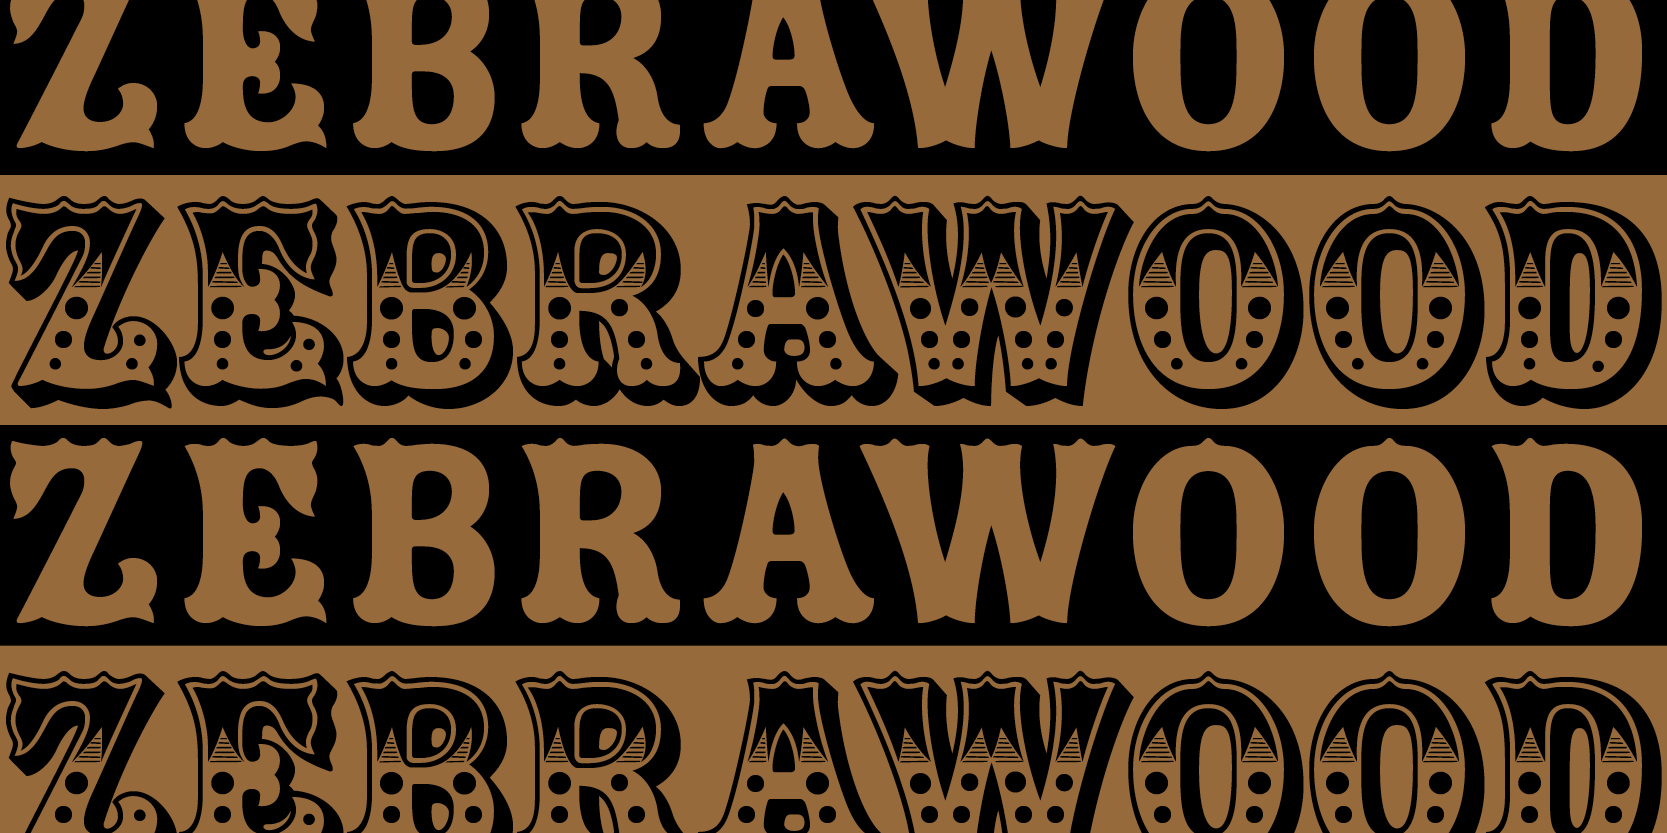 Card displaying Zebrawood typeface in various styles